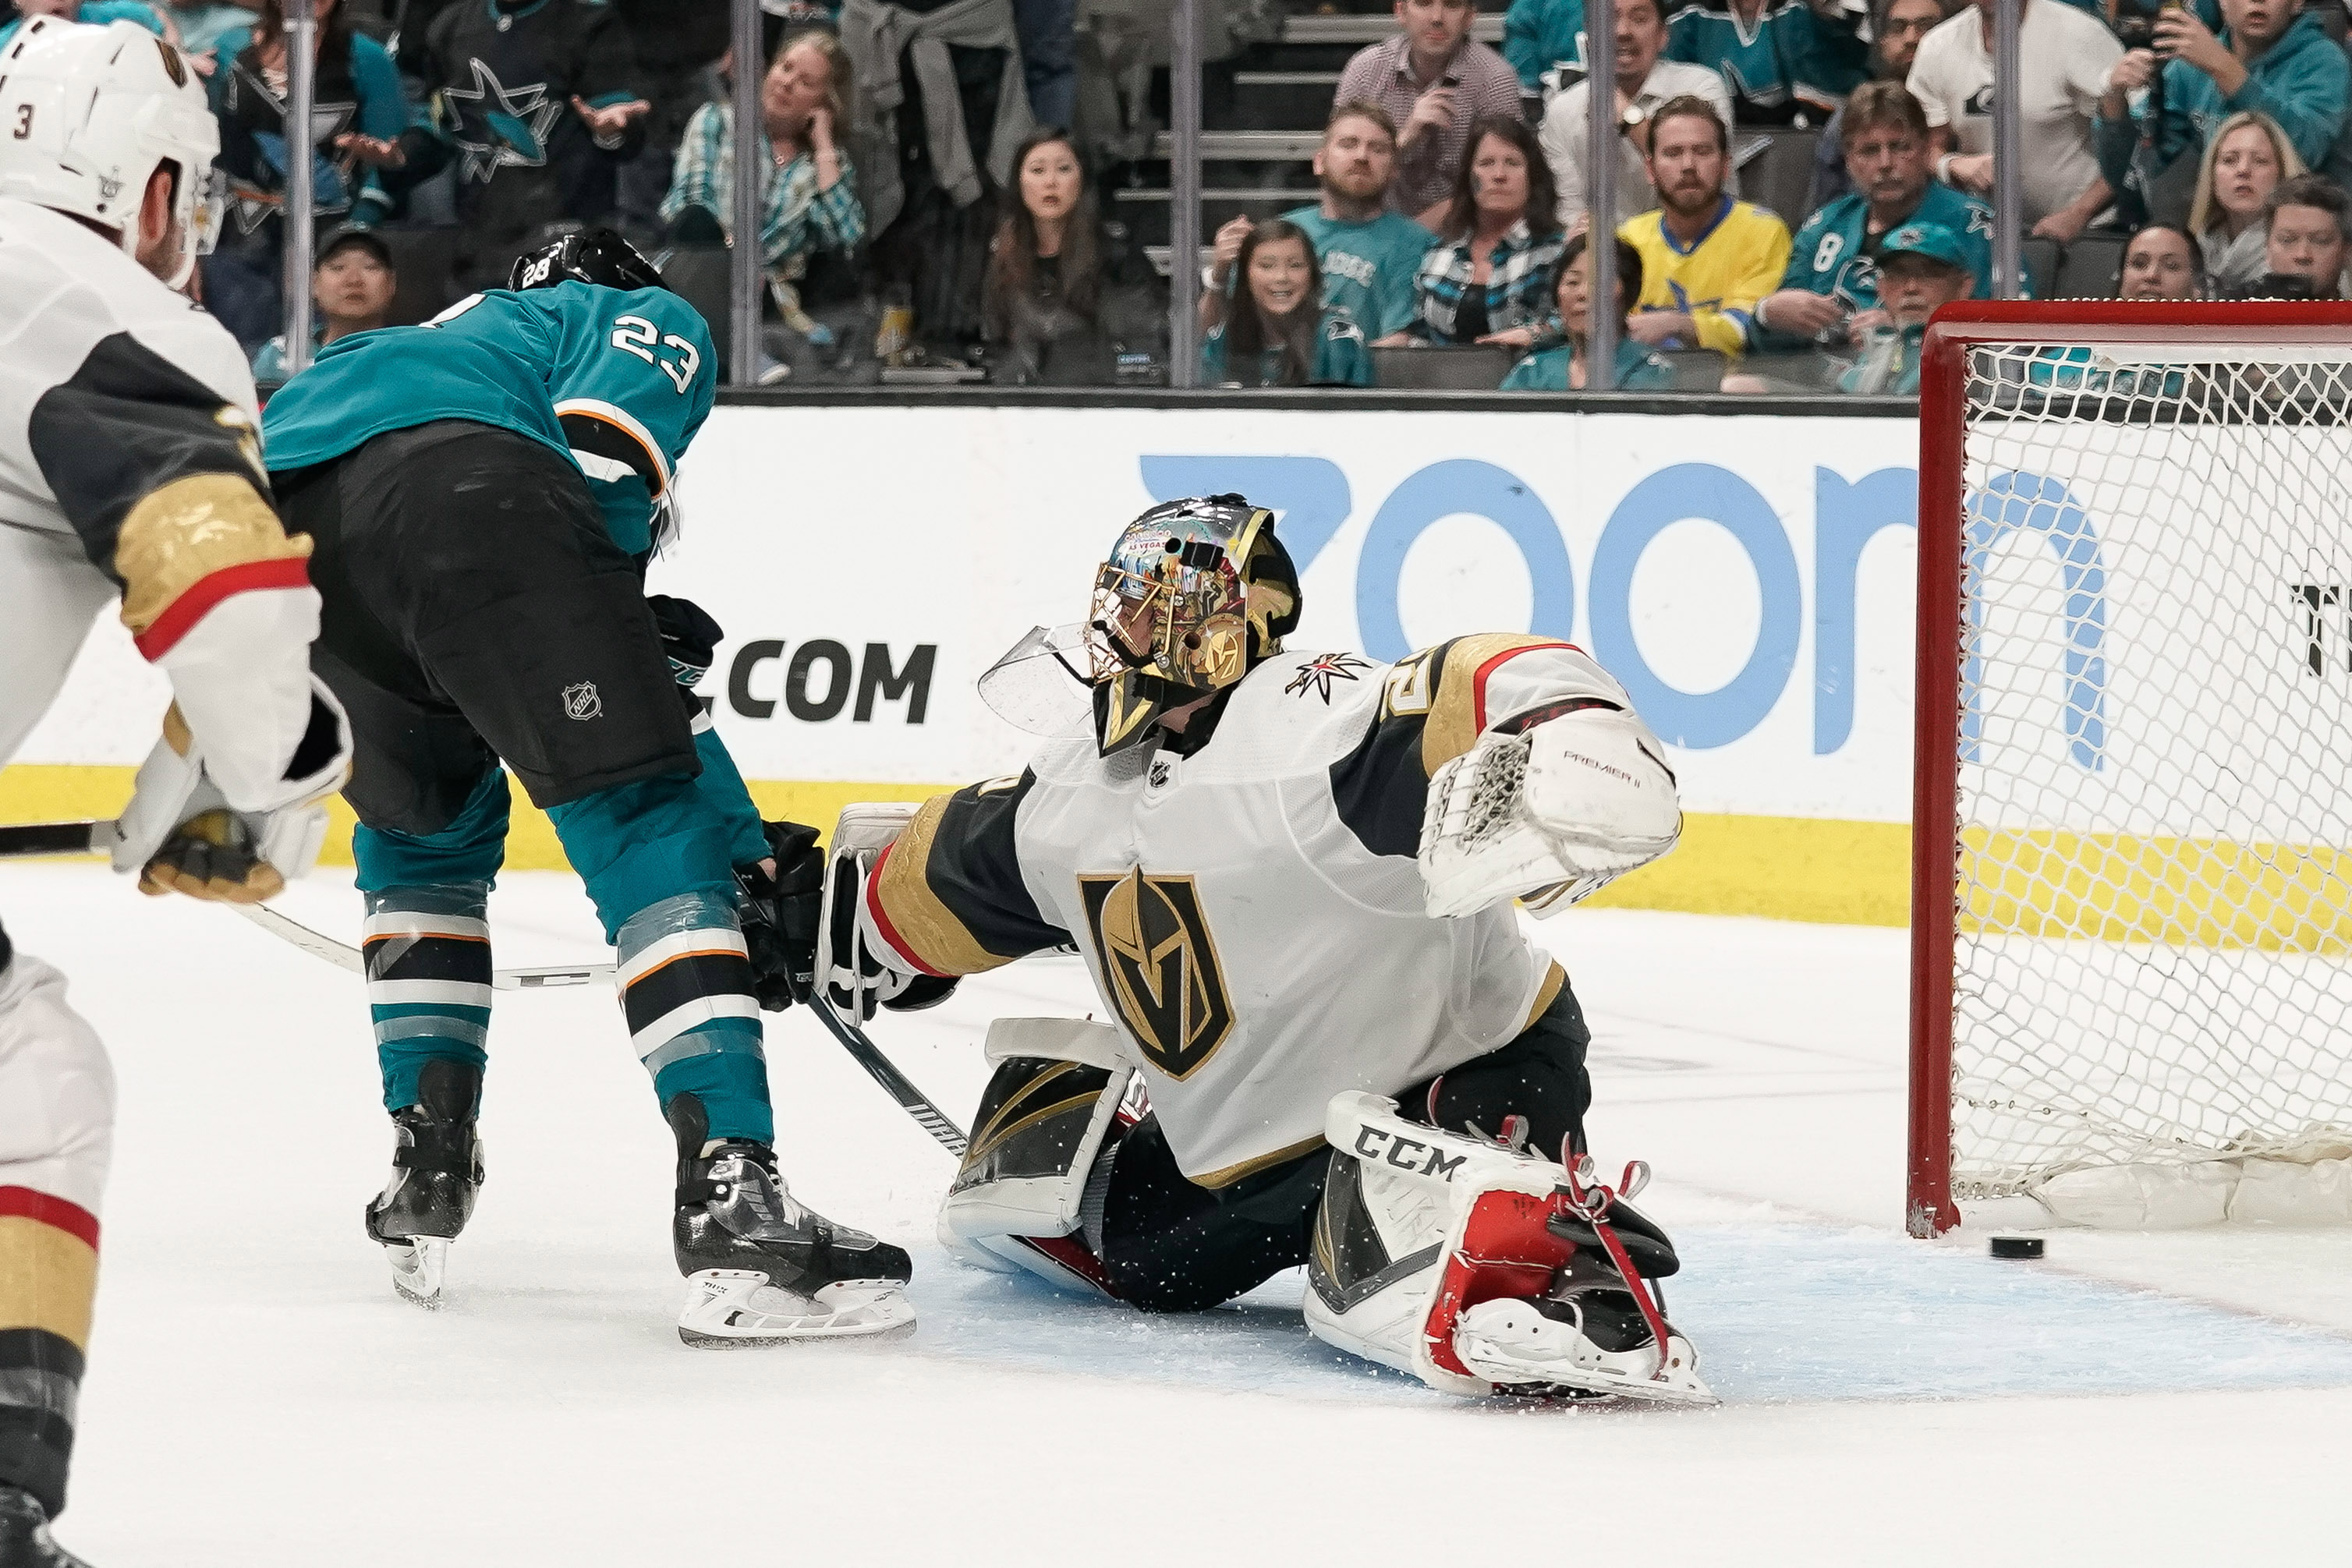 Barclay Goodrow scores past Marc-Andre Fleury as the San Jose Sharks beat the Las Vegas Knights in Game 7 of their 2019 NHL Stanley Cup playoff series